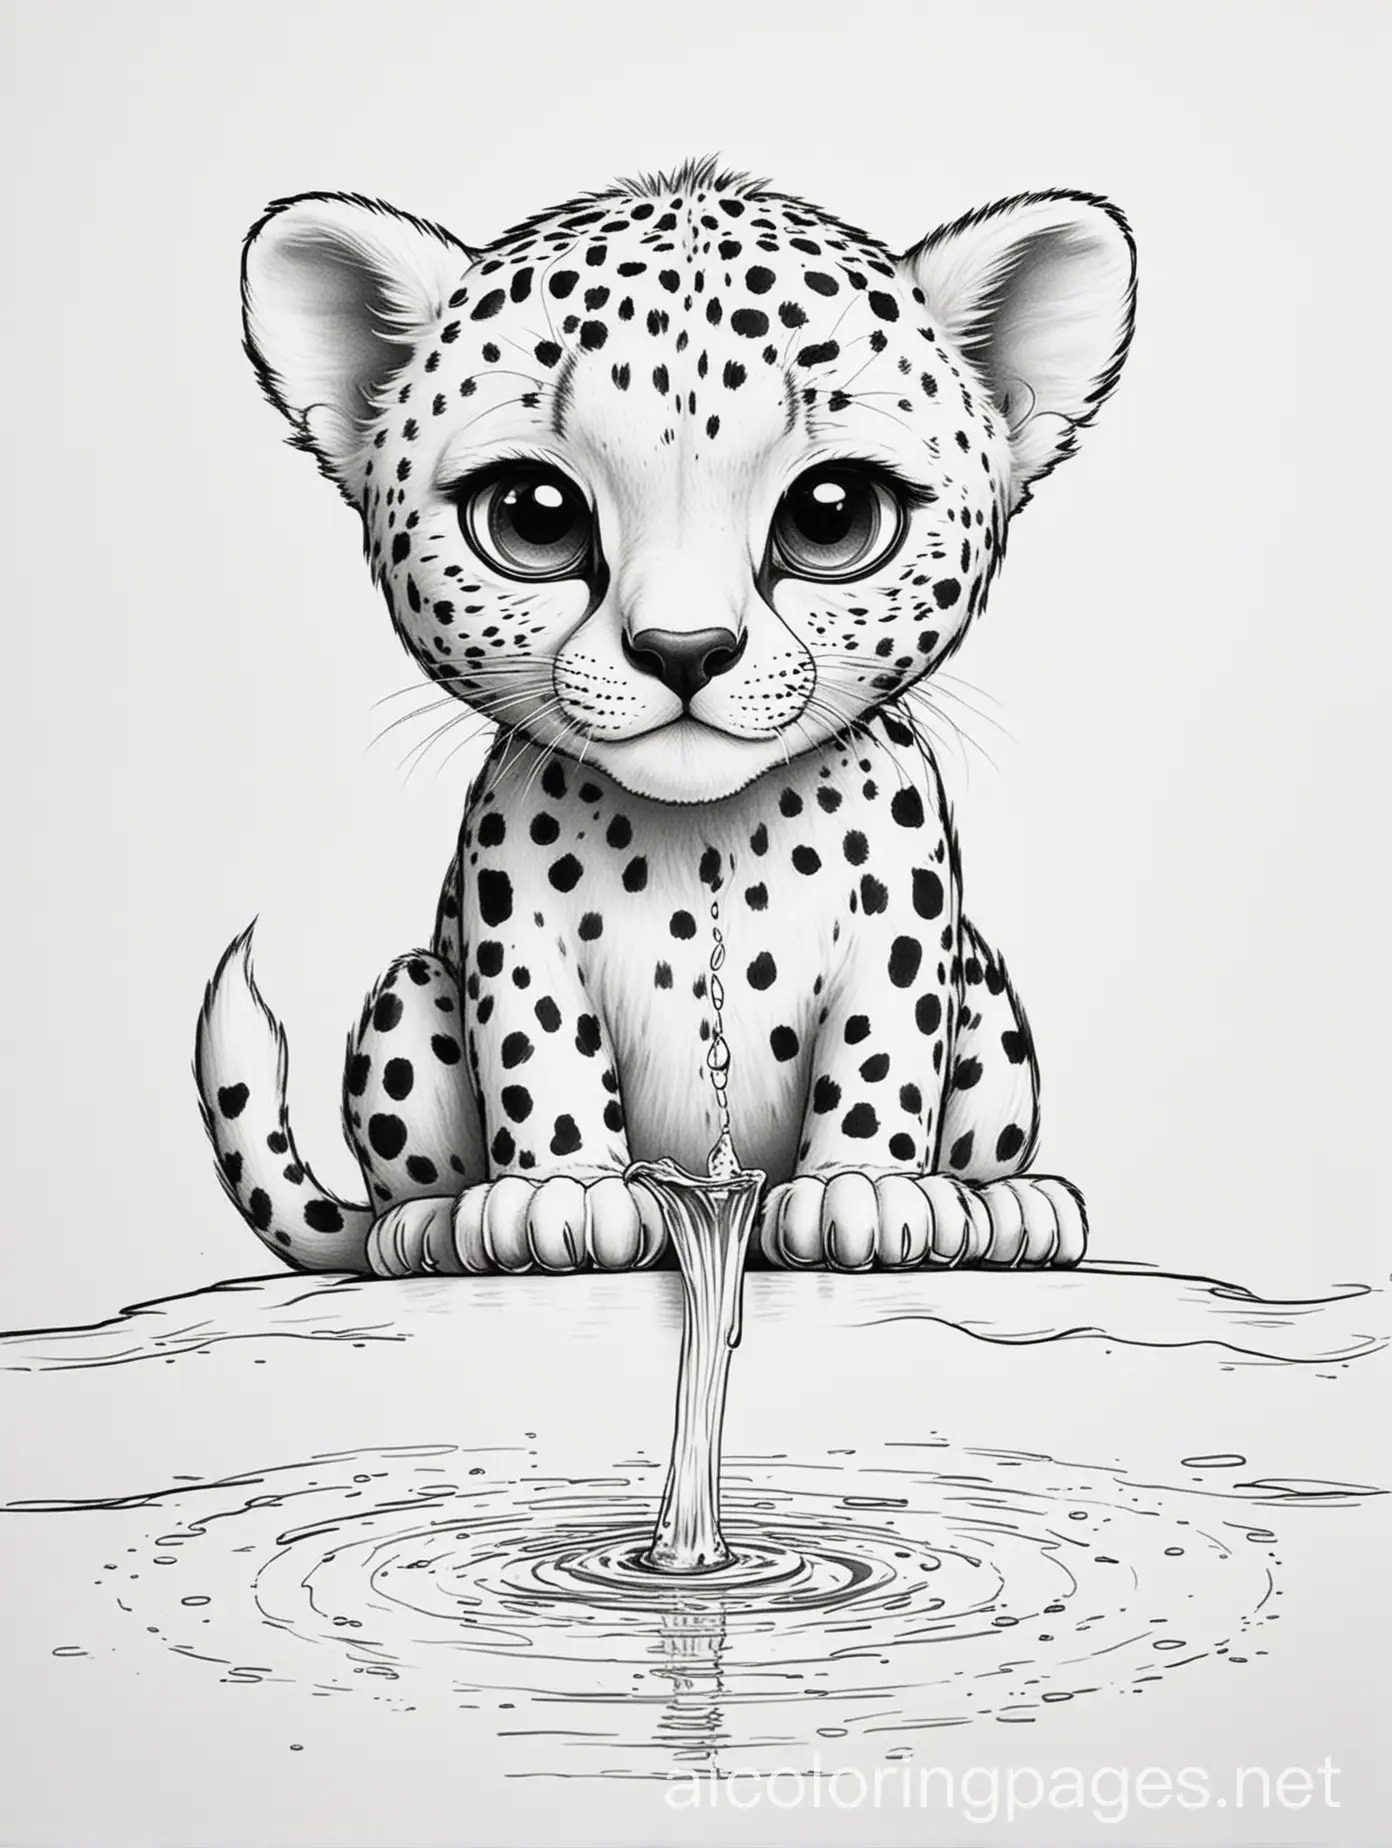 Adorable-Cheetah-Drinking-Water-Coloring-Page-Simple-Line-Art-on-White-Background